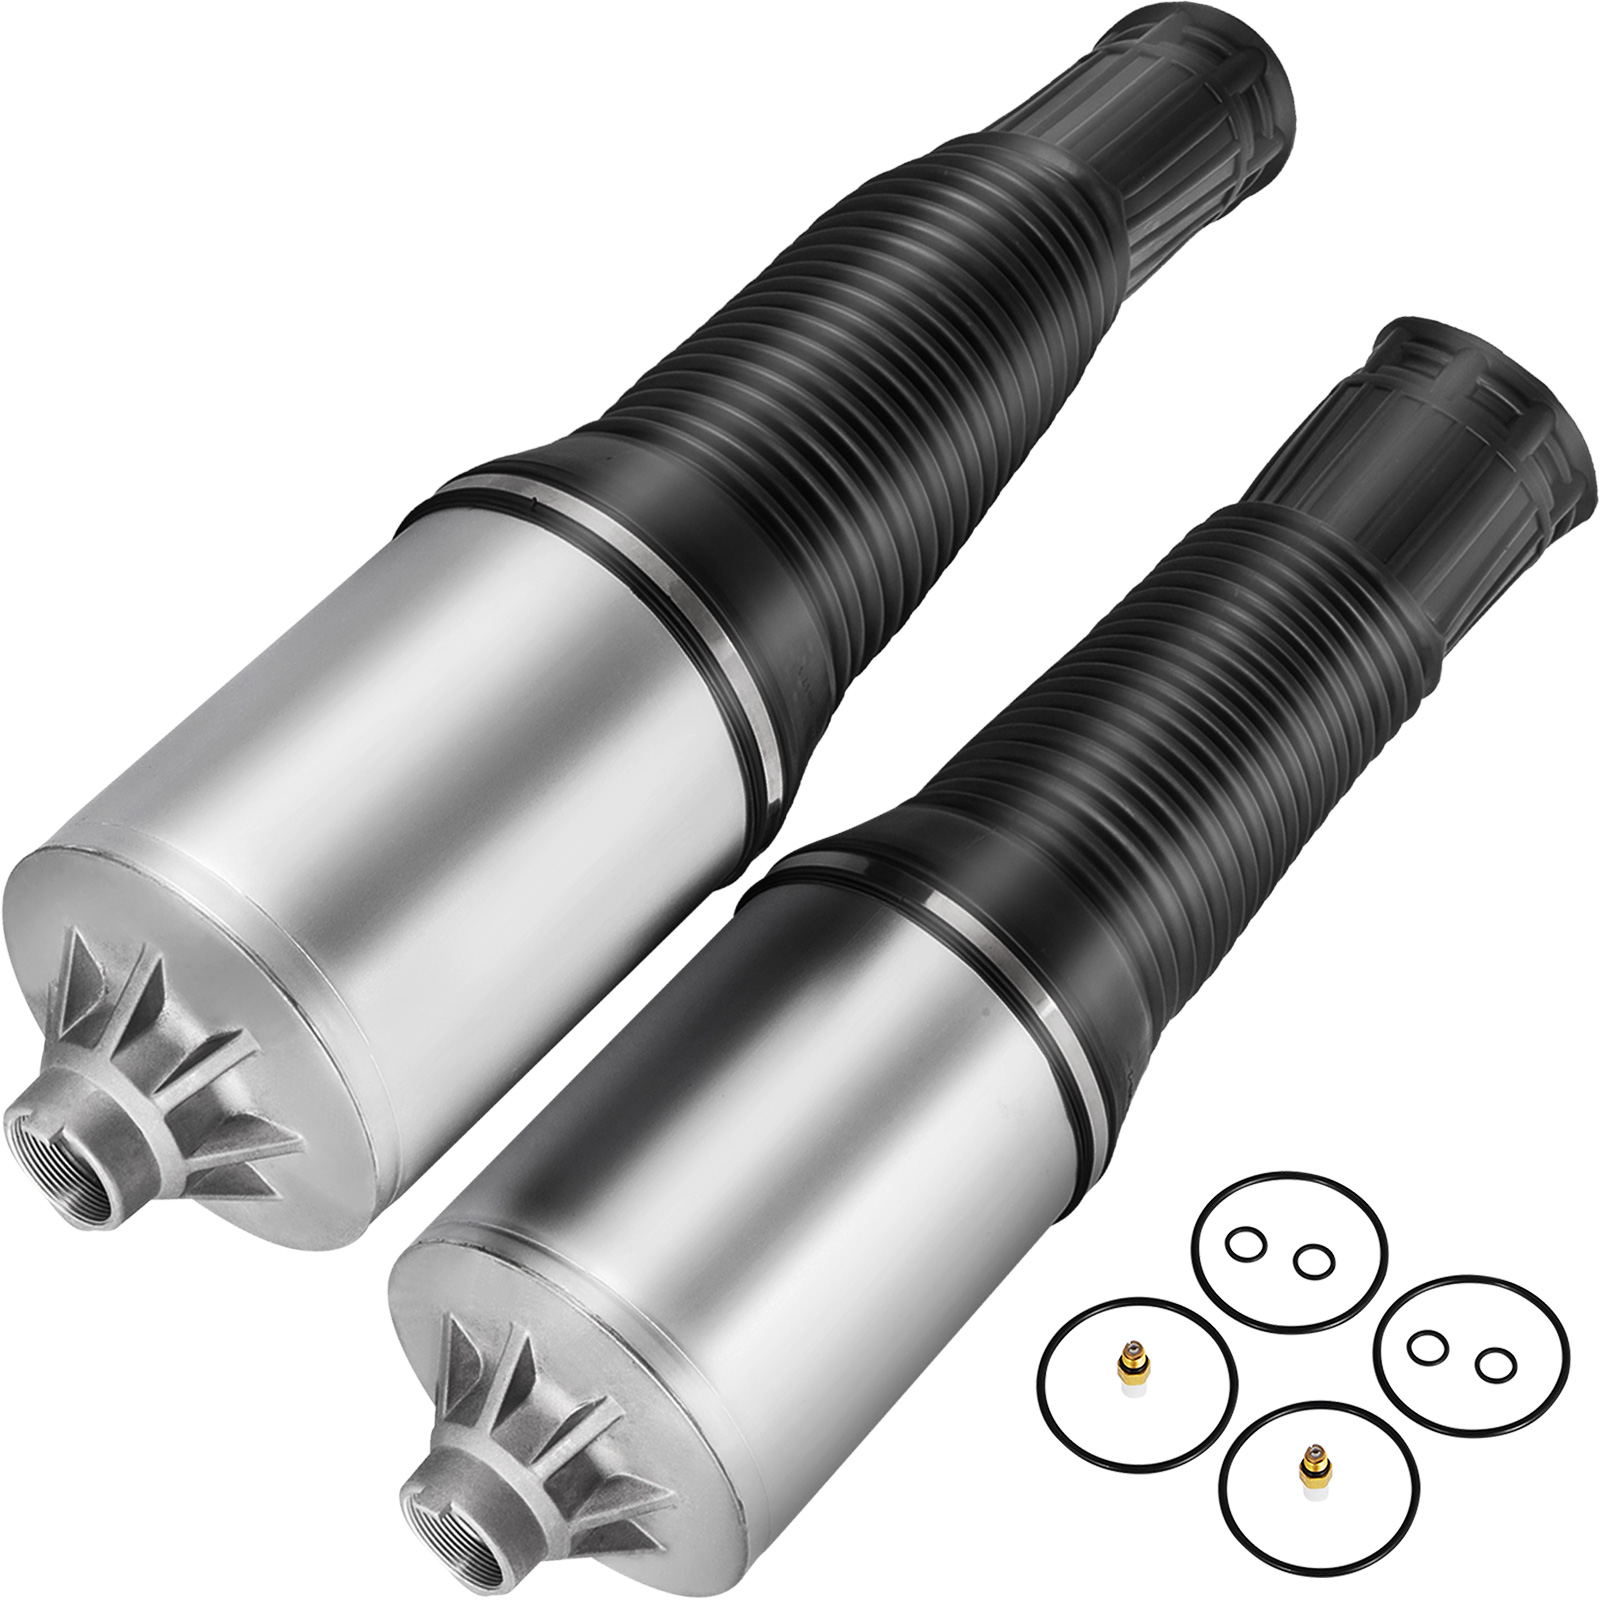 2x Air Suspension Repair Kit For Audi A8 S8 Quattro D3 4E 2002-10 Front L+R New от Vevor Many GEOs